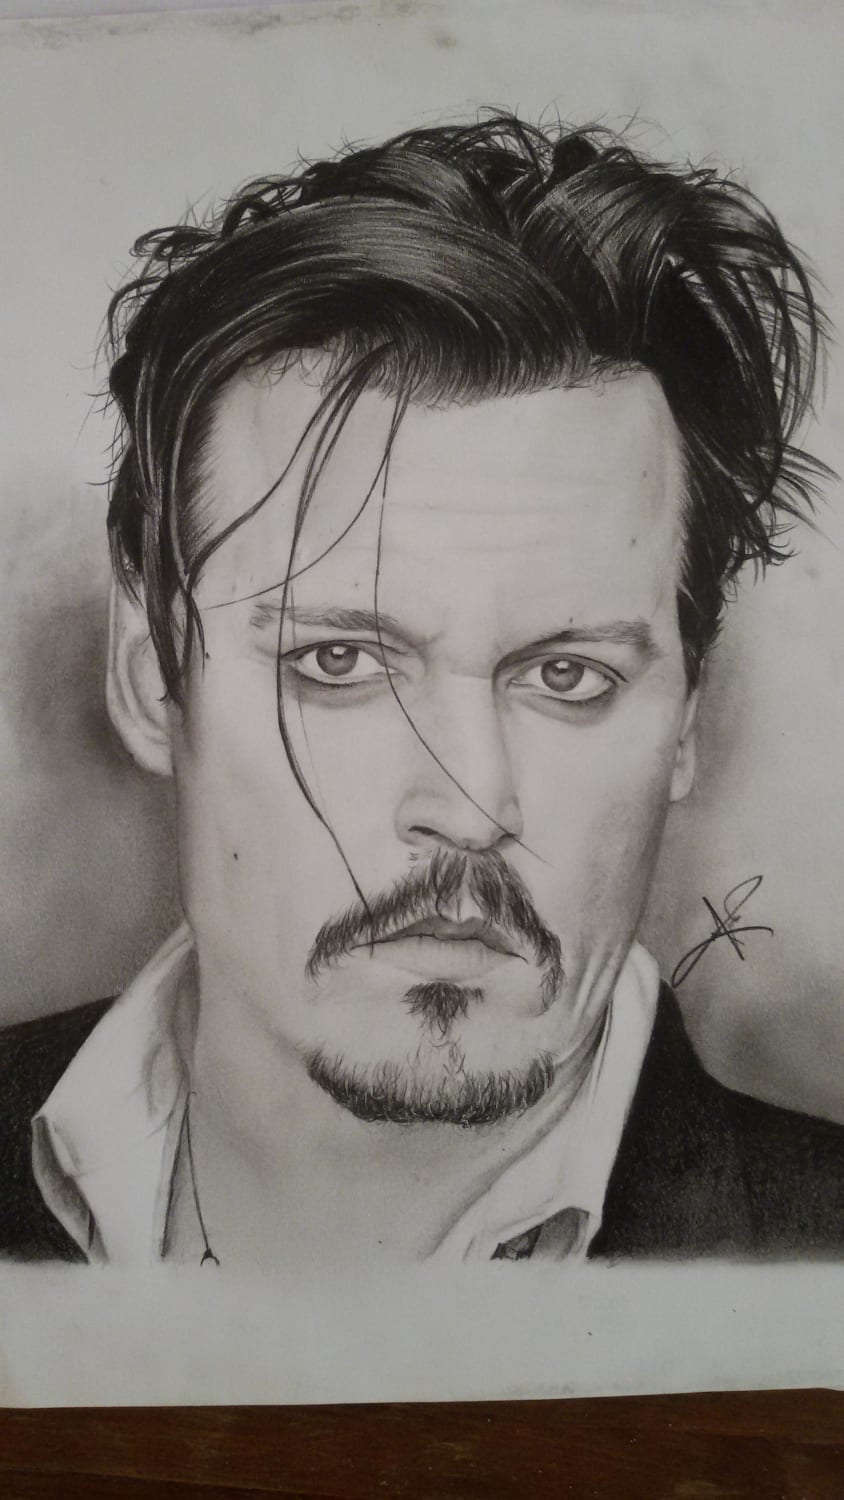 Johnny Depp portrait, thought I'd share with everyone my latest work which was done 2016. hoping to get back to my hobby again !